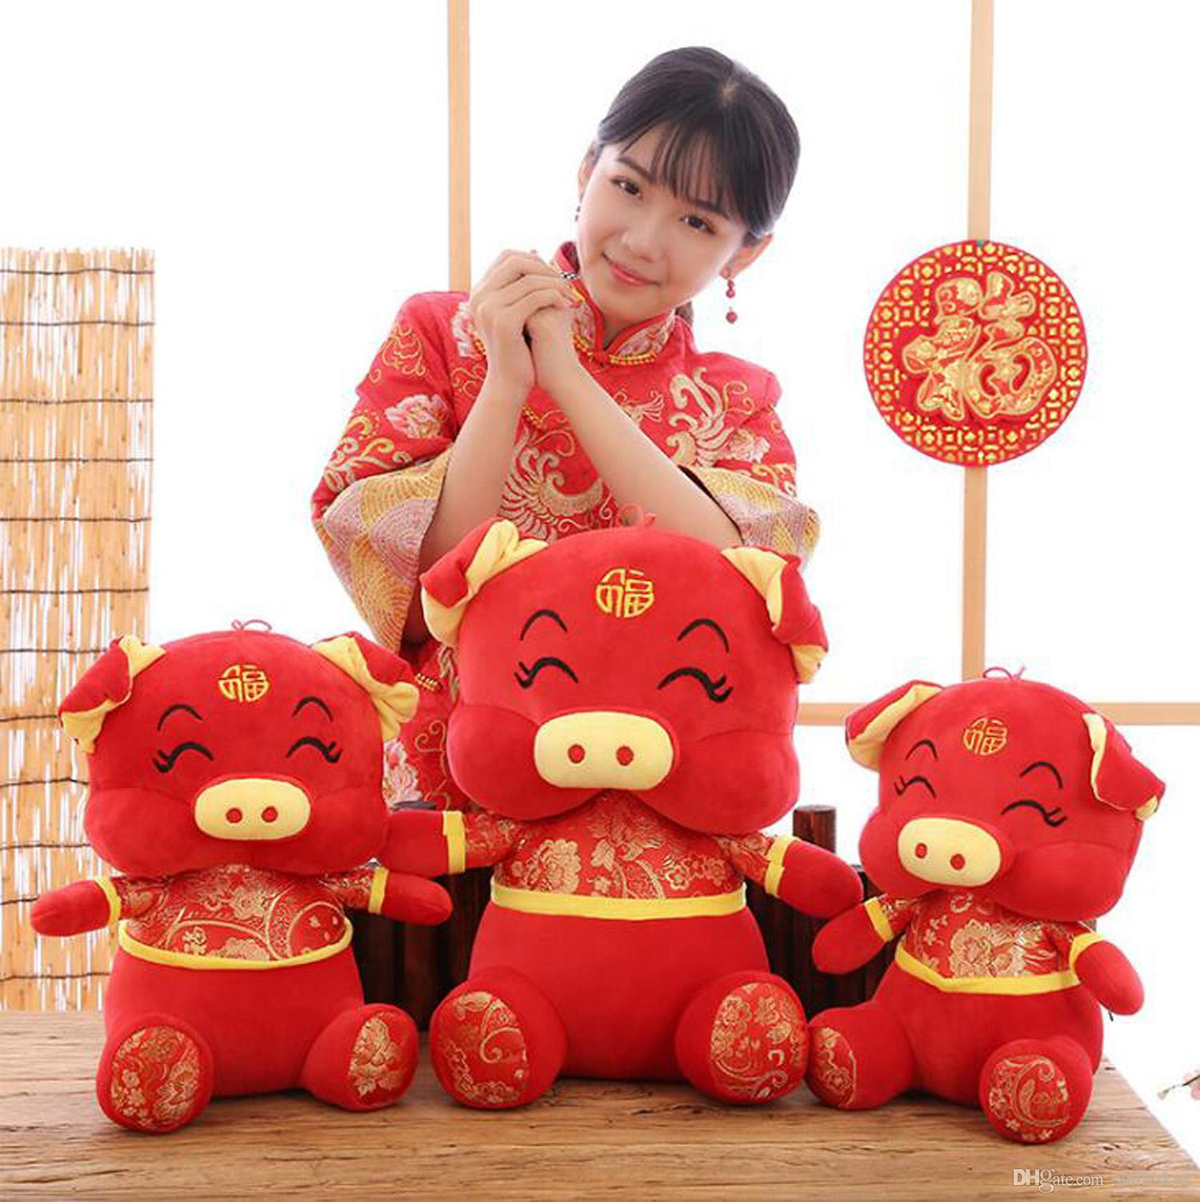 Vietnam and Asian Countries is about welcoming the Lunar New Year of The Pig 2019